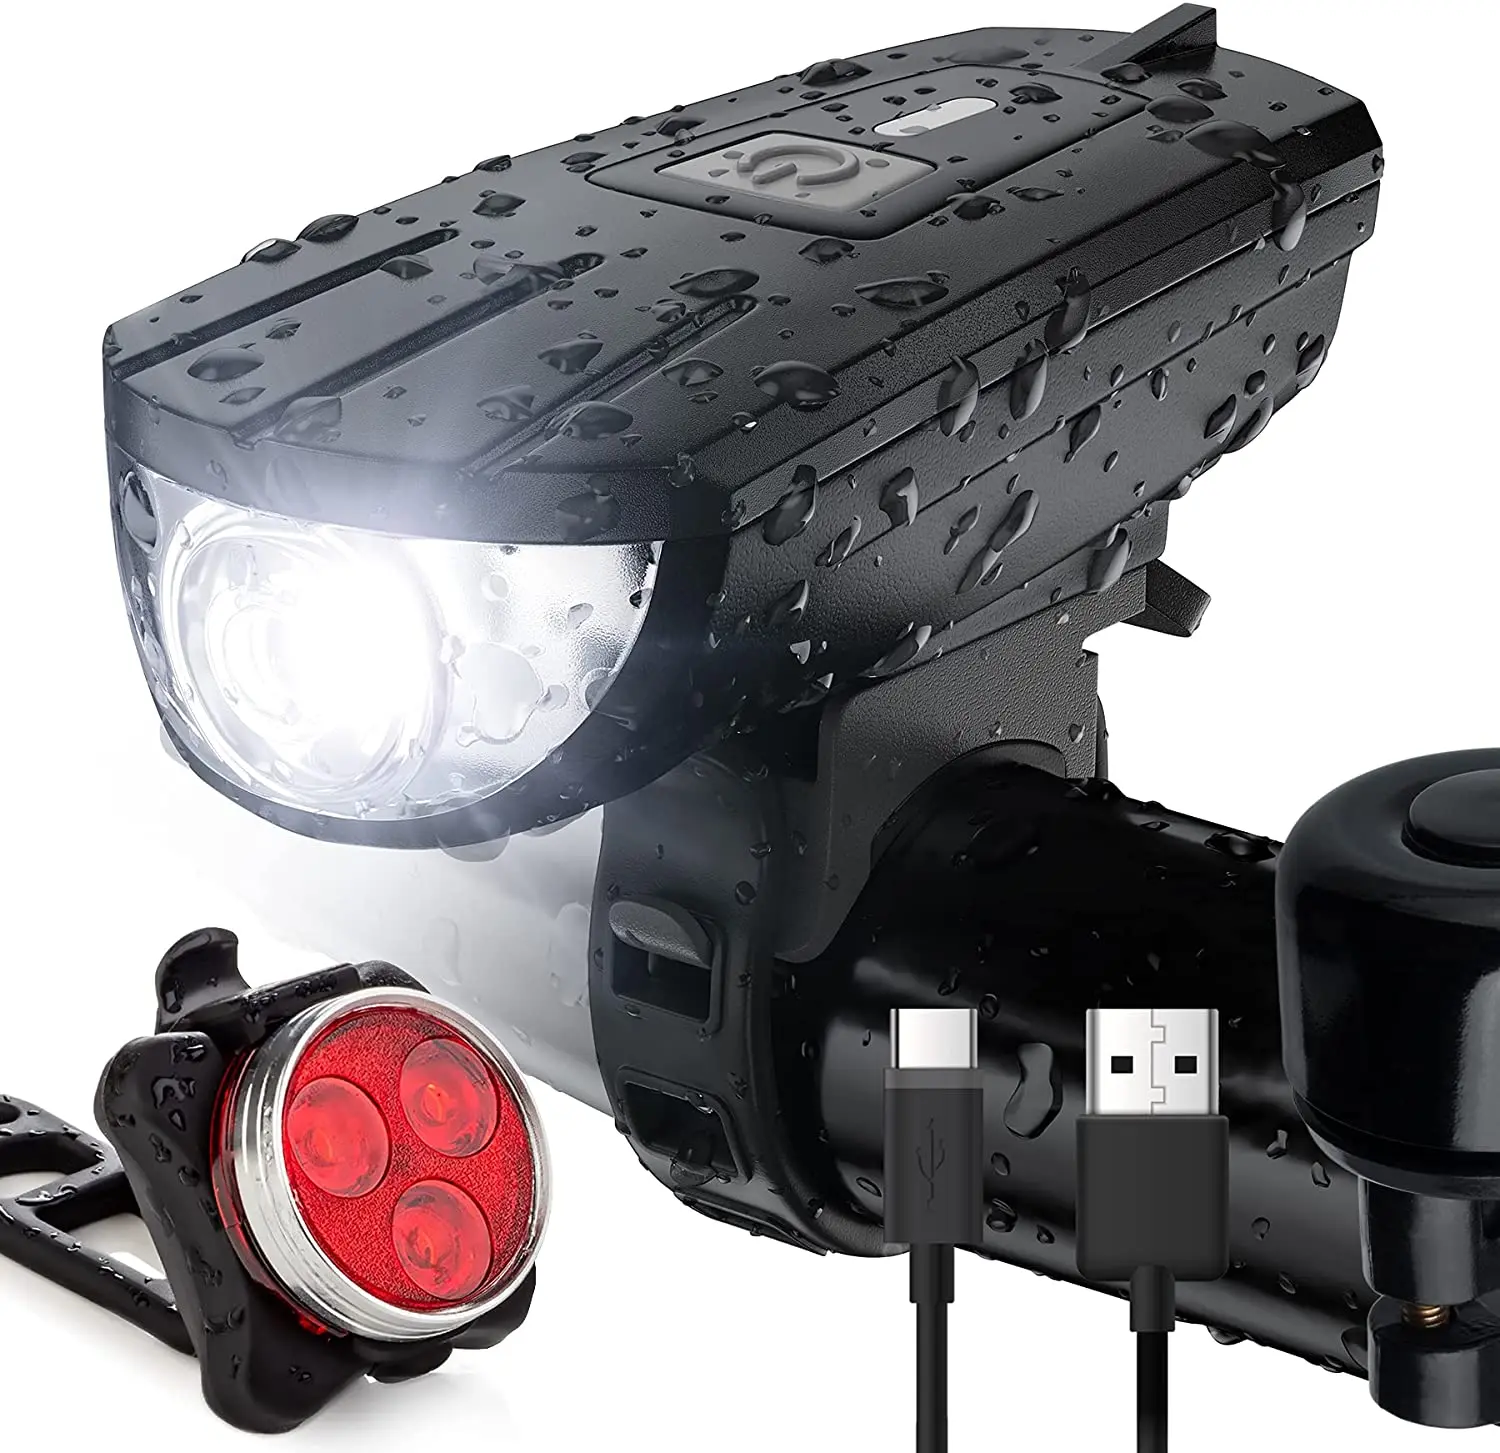 

Rechargeable Bike Light 3 Modes Instant Install Without Tools Front and Back Illumination - Waterproof, Lightweight,